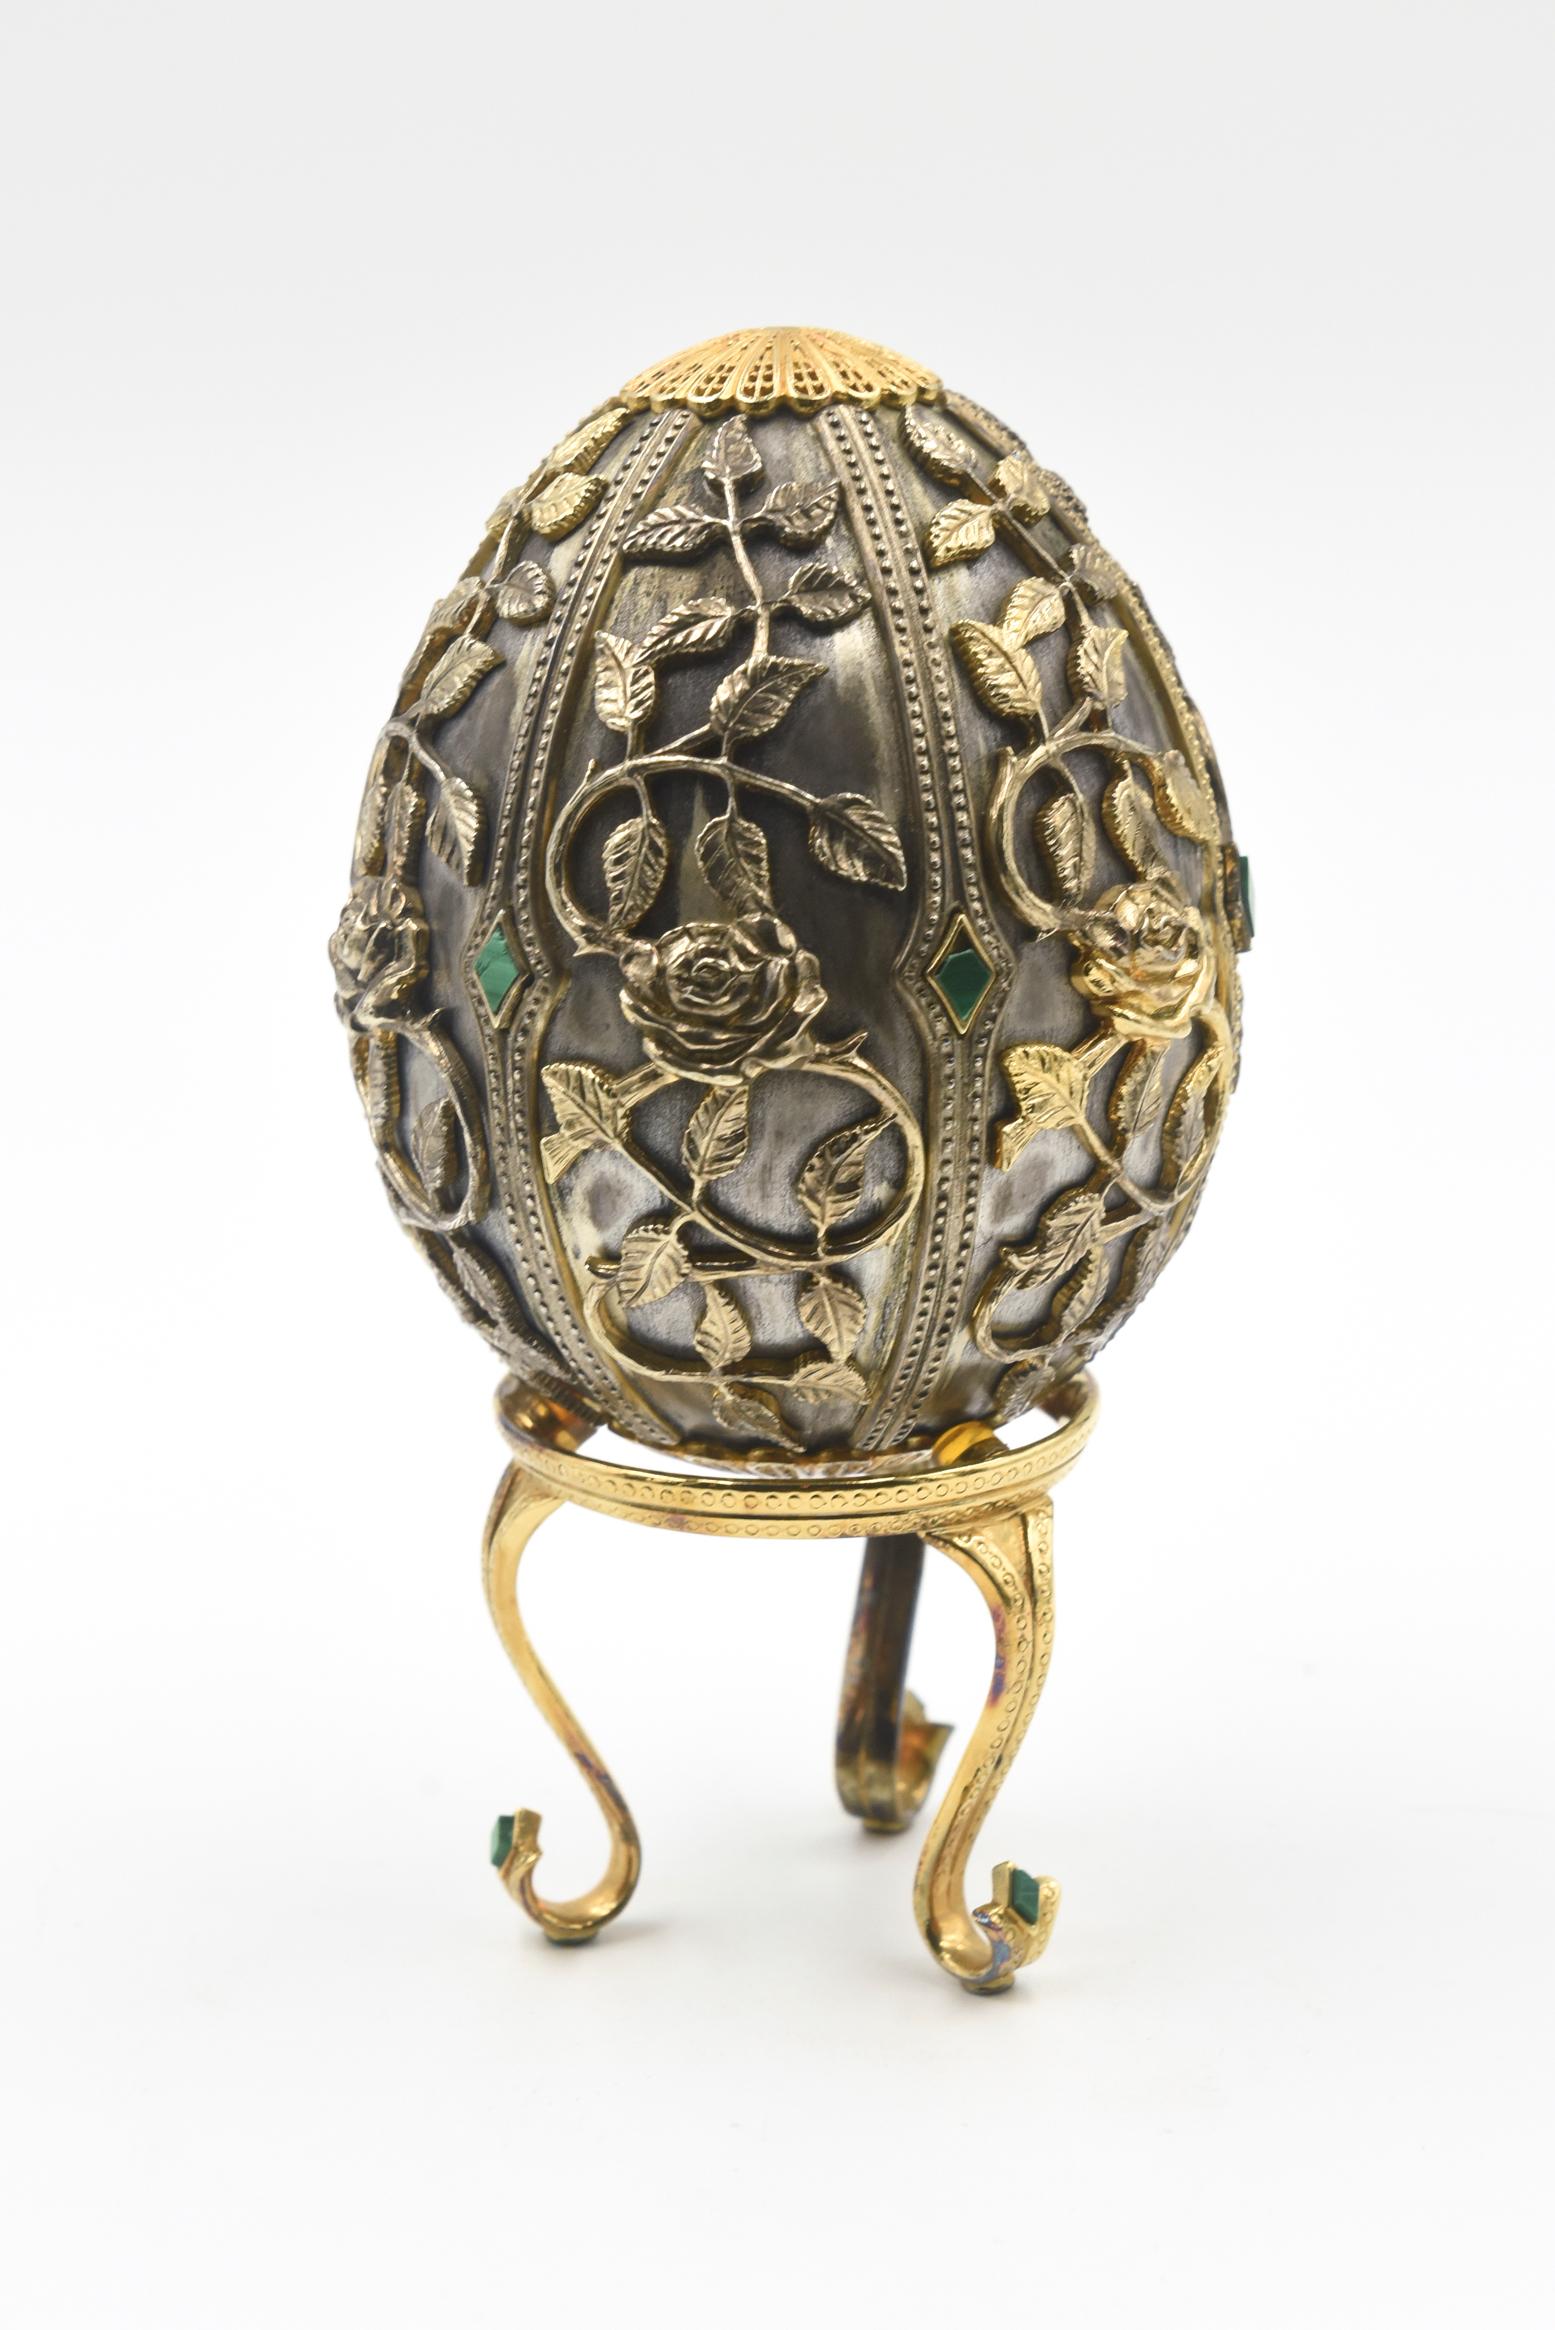 Description from Franklin MInt:
House of Faberge Egg 13.45 troy ozs Sterling Silver Vermeil with Malachite Stand Franklin MInt, 1977 Emergence of Spring Filigree Butterfly Egg, 925 Vermeil Stand (18k Bee Brooch - This piece is missing), Numbered 23,